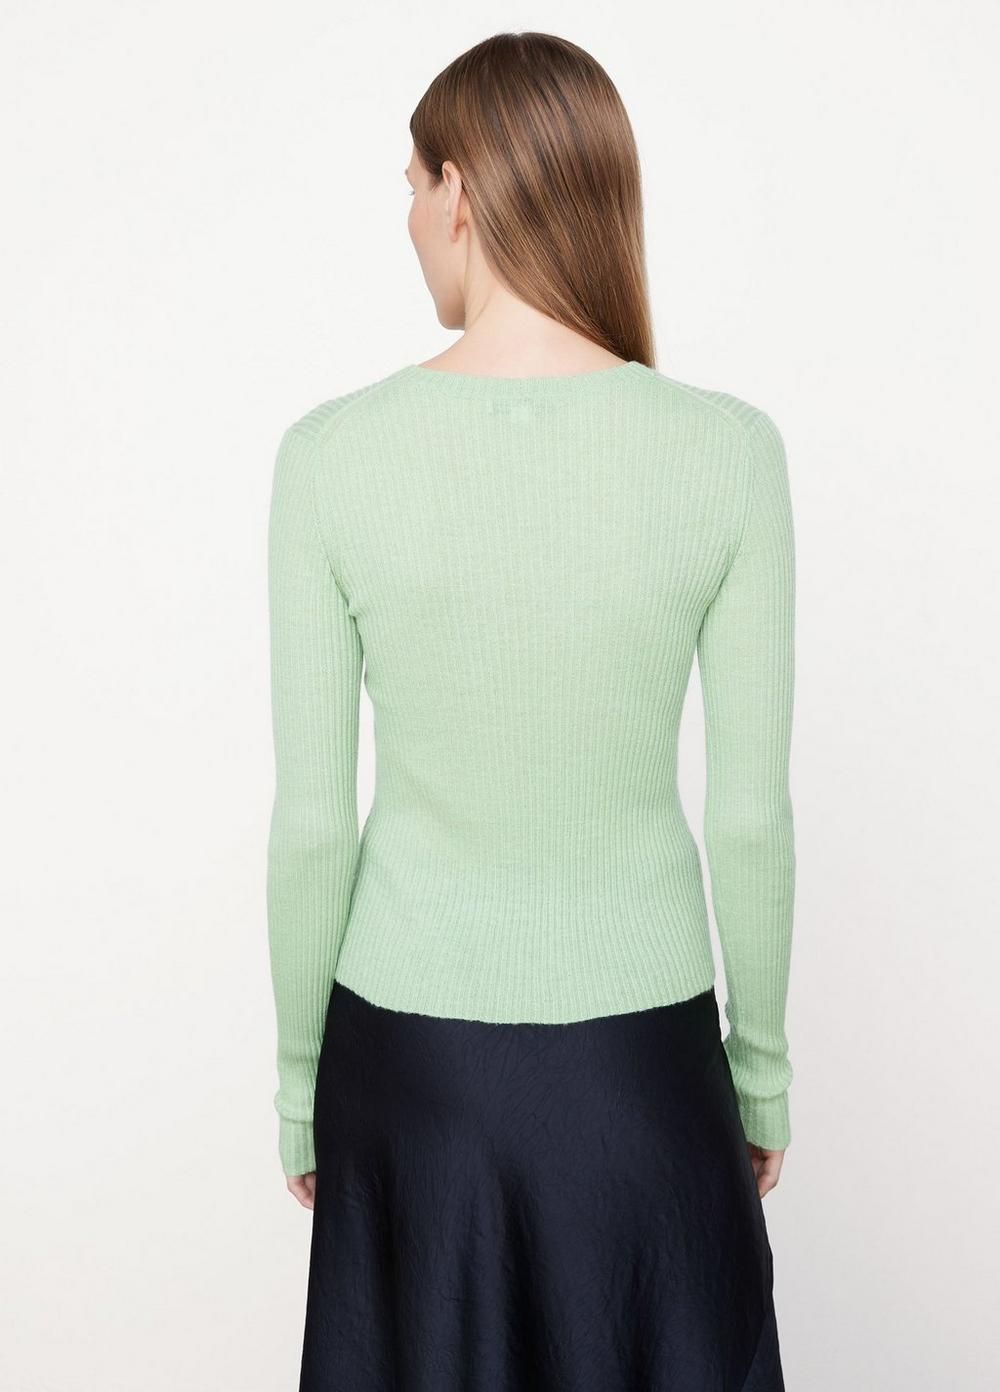 Vince | Ribbed Crew Neck Sweater in Aloe Bloom | Vince Unfold